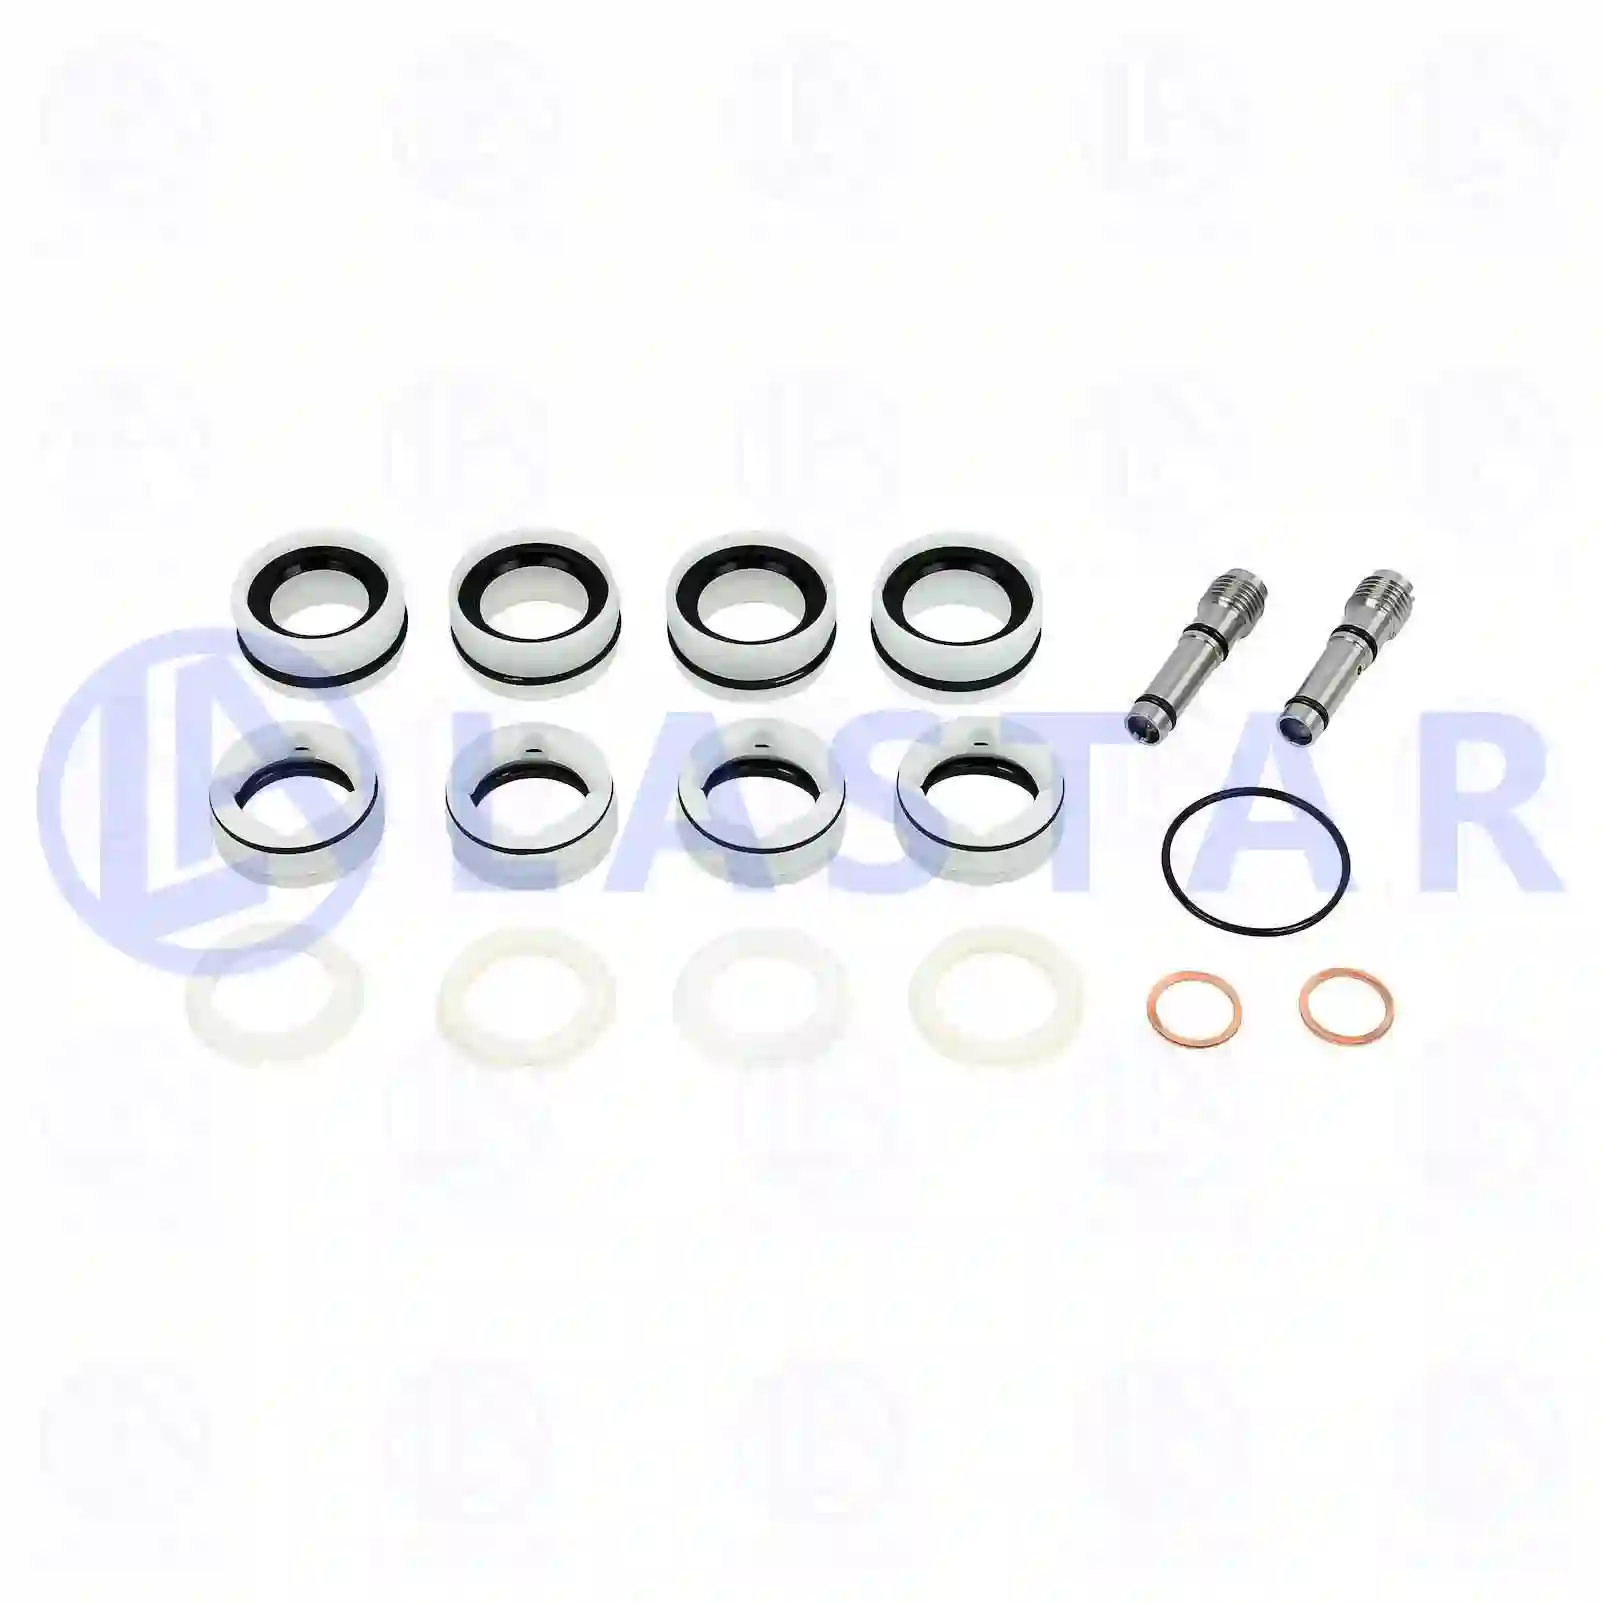 Repair kit, switching device, 77733127, 2605098 ||  77733127 Lastar Spare Part | Truck Spare Parts, Auotomotive Spare Parts Repair kit, switching device, 77733127, 2605098 ||  77733127 Lastar Spare Part | Truck Spare Parts, Auotomotive Spare Parts